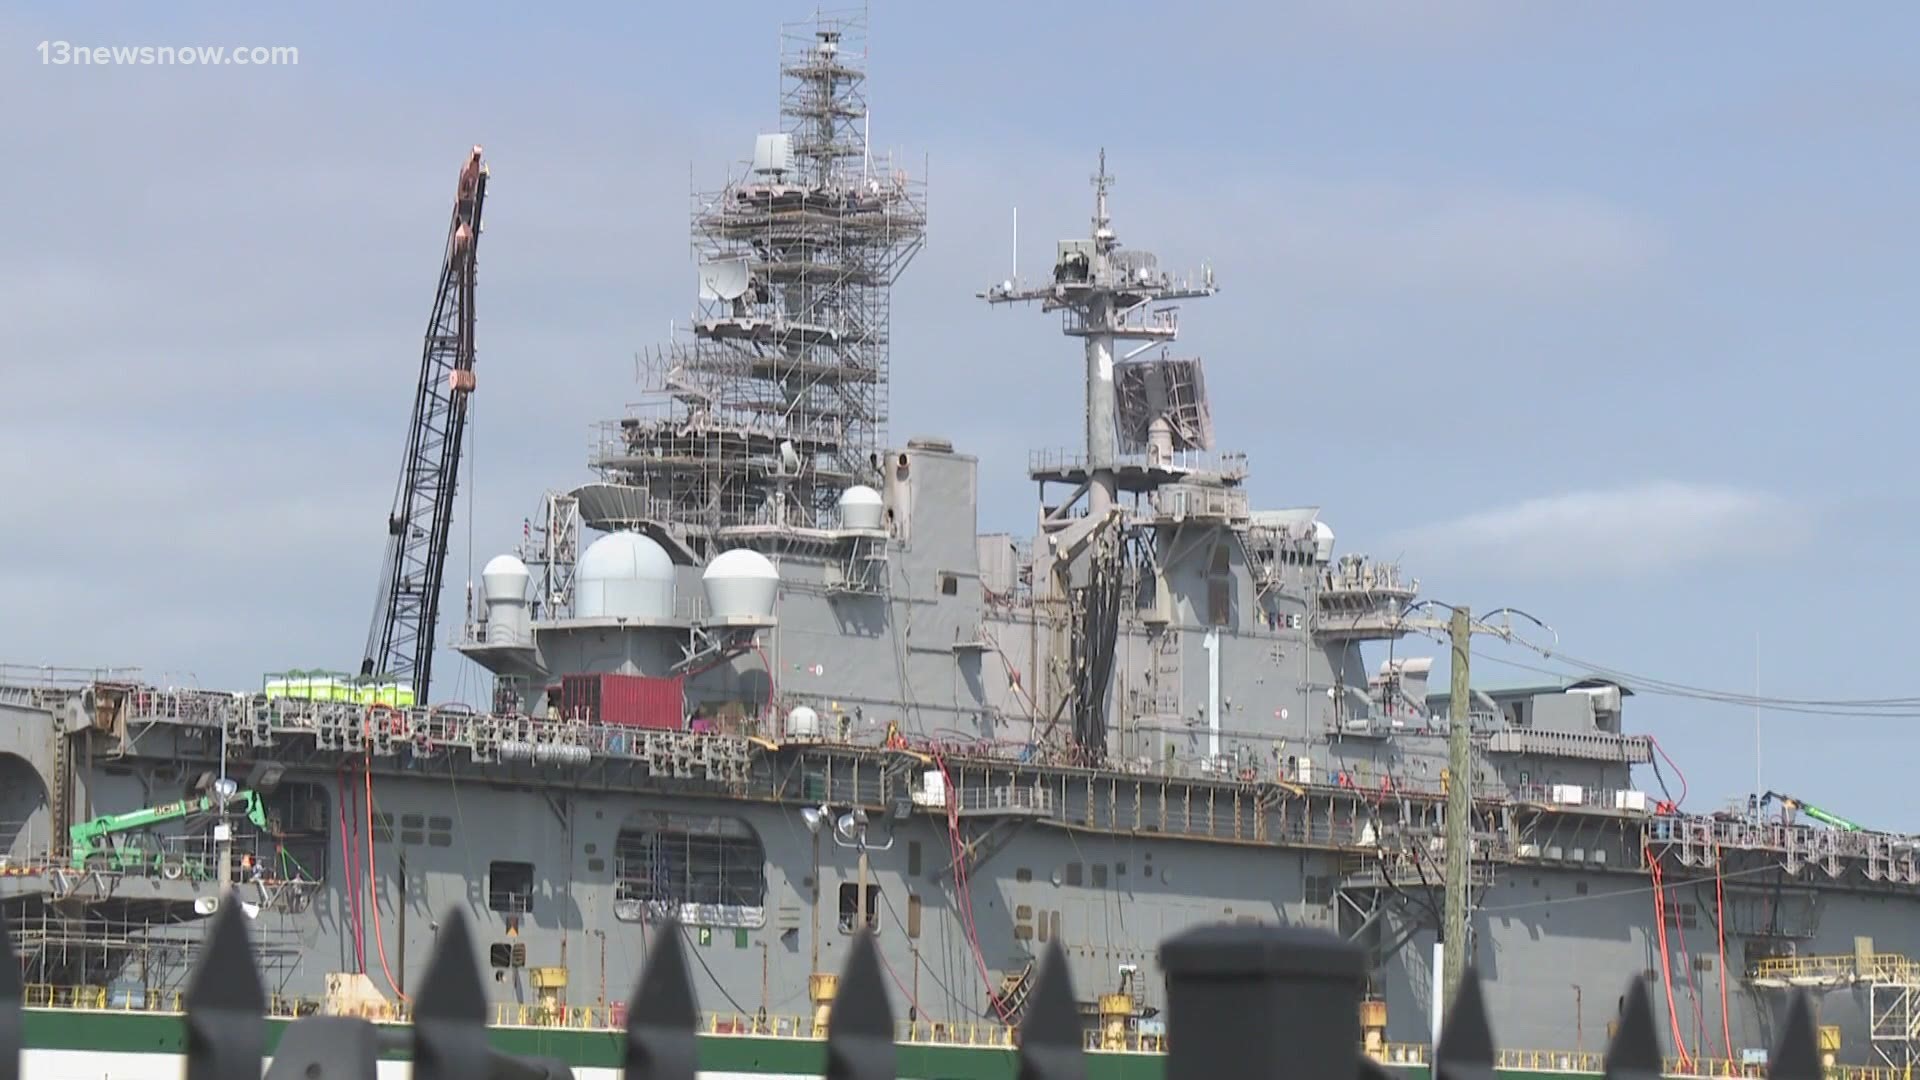 BAE Systems and the ship repair industry is looking to Congress, for more predictability in defense appropriations.